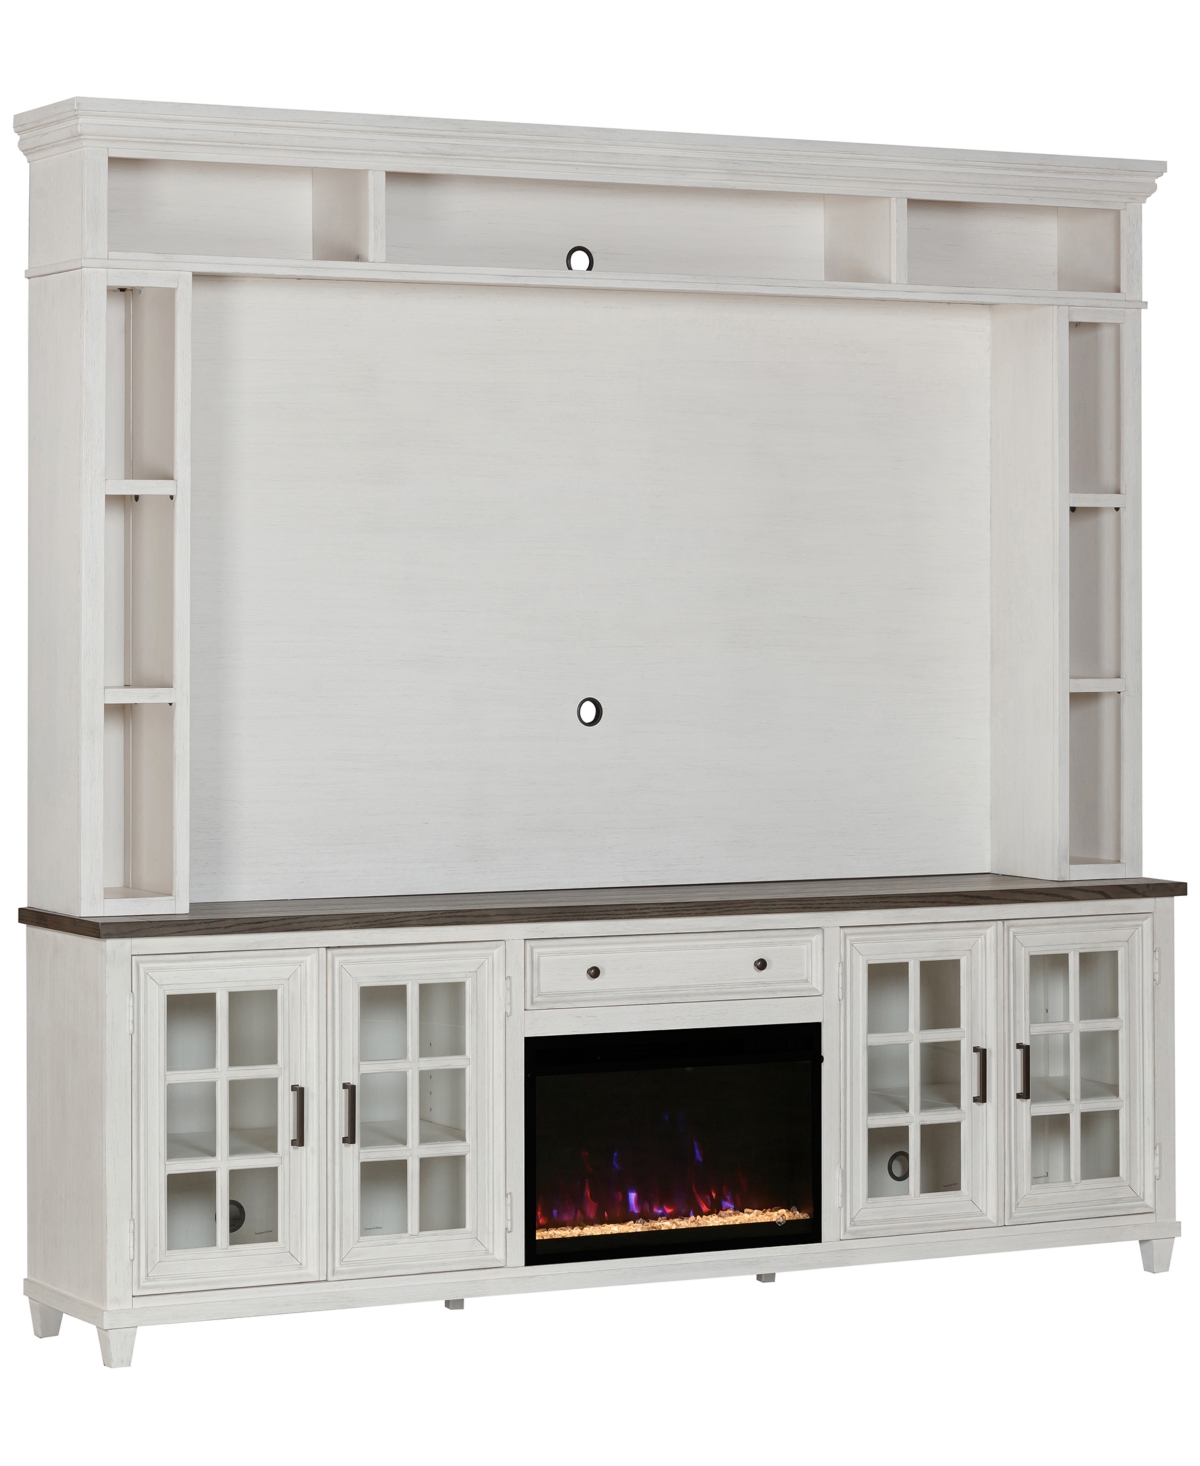 Macy's 96" Dawnwood 3pc Tv Console Set (96" Console, Hutch And Fireplace) In White